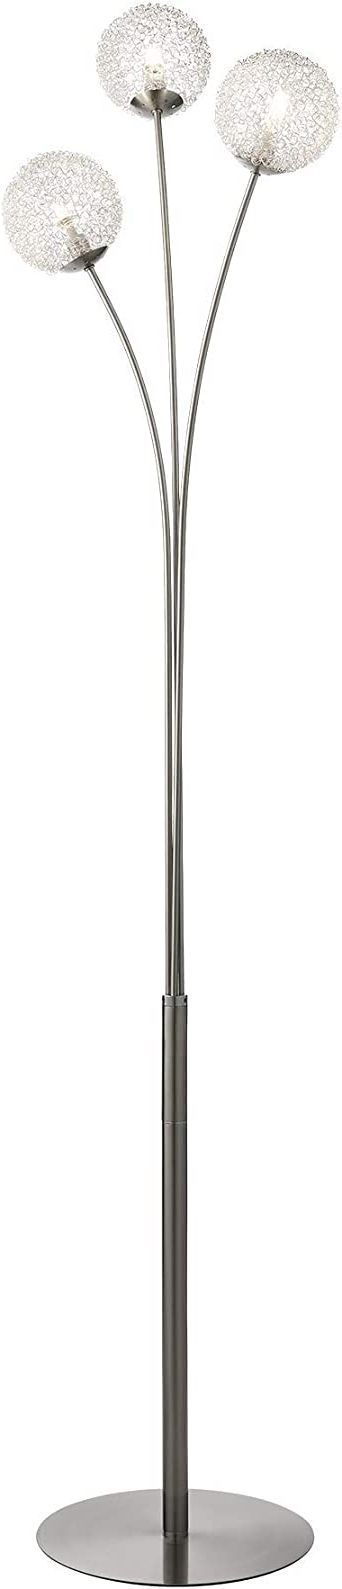 Glass Satin Nickel Standing Lamps Intended For Newest 3 Way Satin Nickel Floor Lamp With Aluminium And Glass Shade. This  Contemporary 3 Way Floor Lamp Is Complete With Glass Globe Design Shades  In Line On/off Foot Switch. : Amazon.co (View 3 of 10)